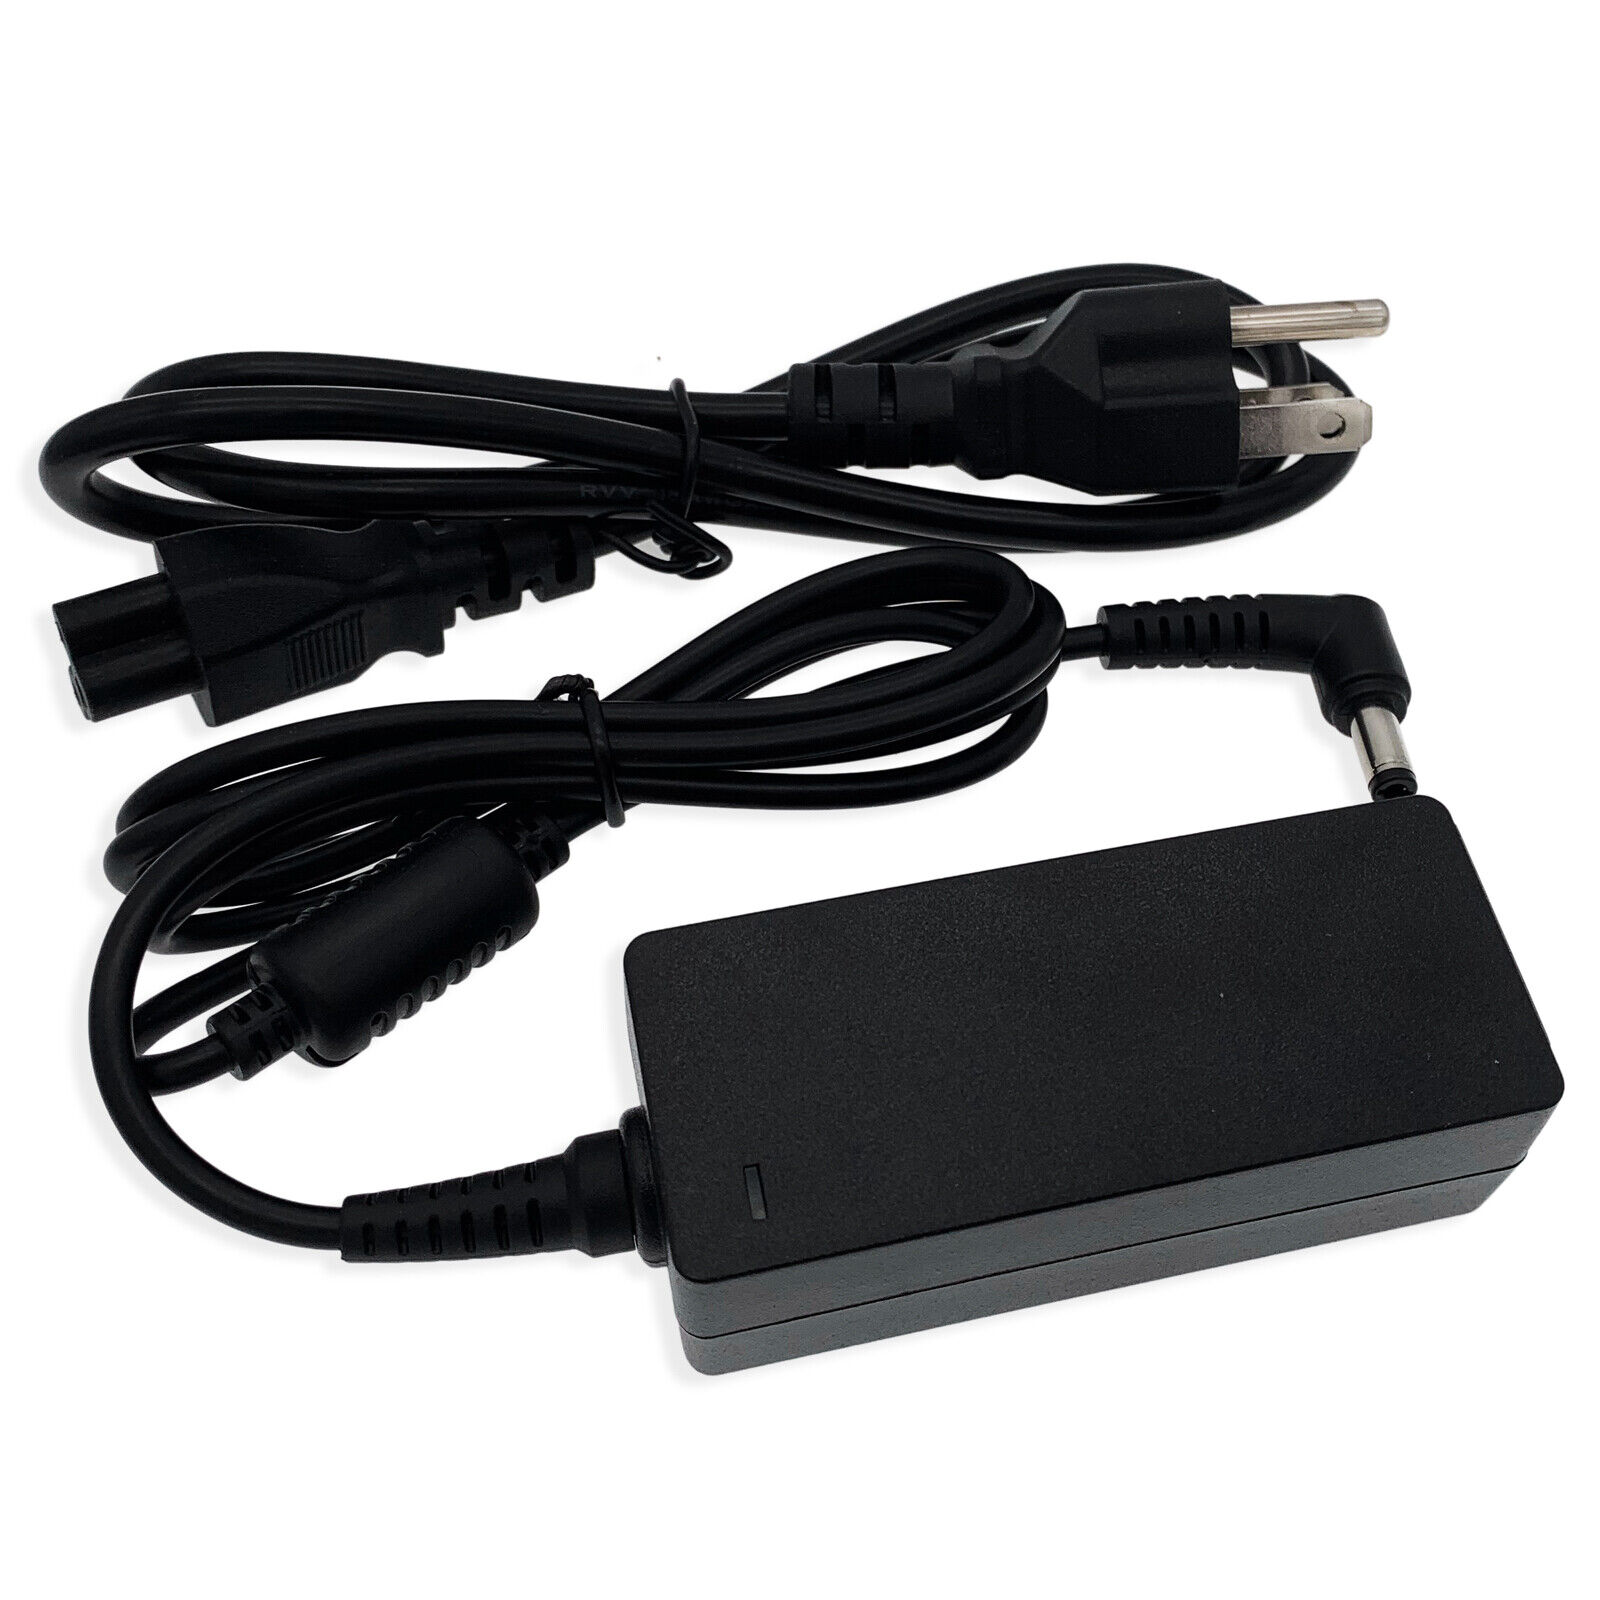 AC / DC Adapter Charger For Zotac Zbox Nano C Series CI323 Mini PC Power Supply Brand Unbranded/Generic Bundled Items P